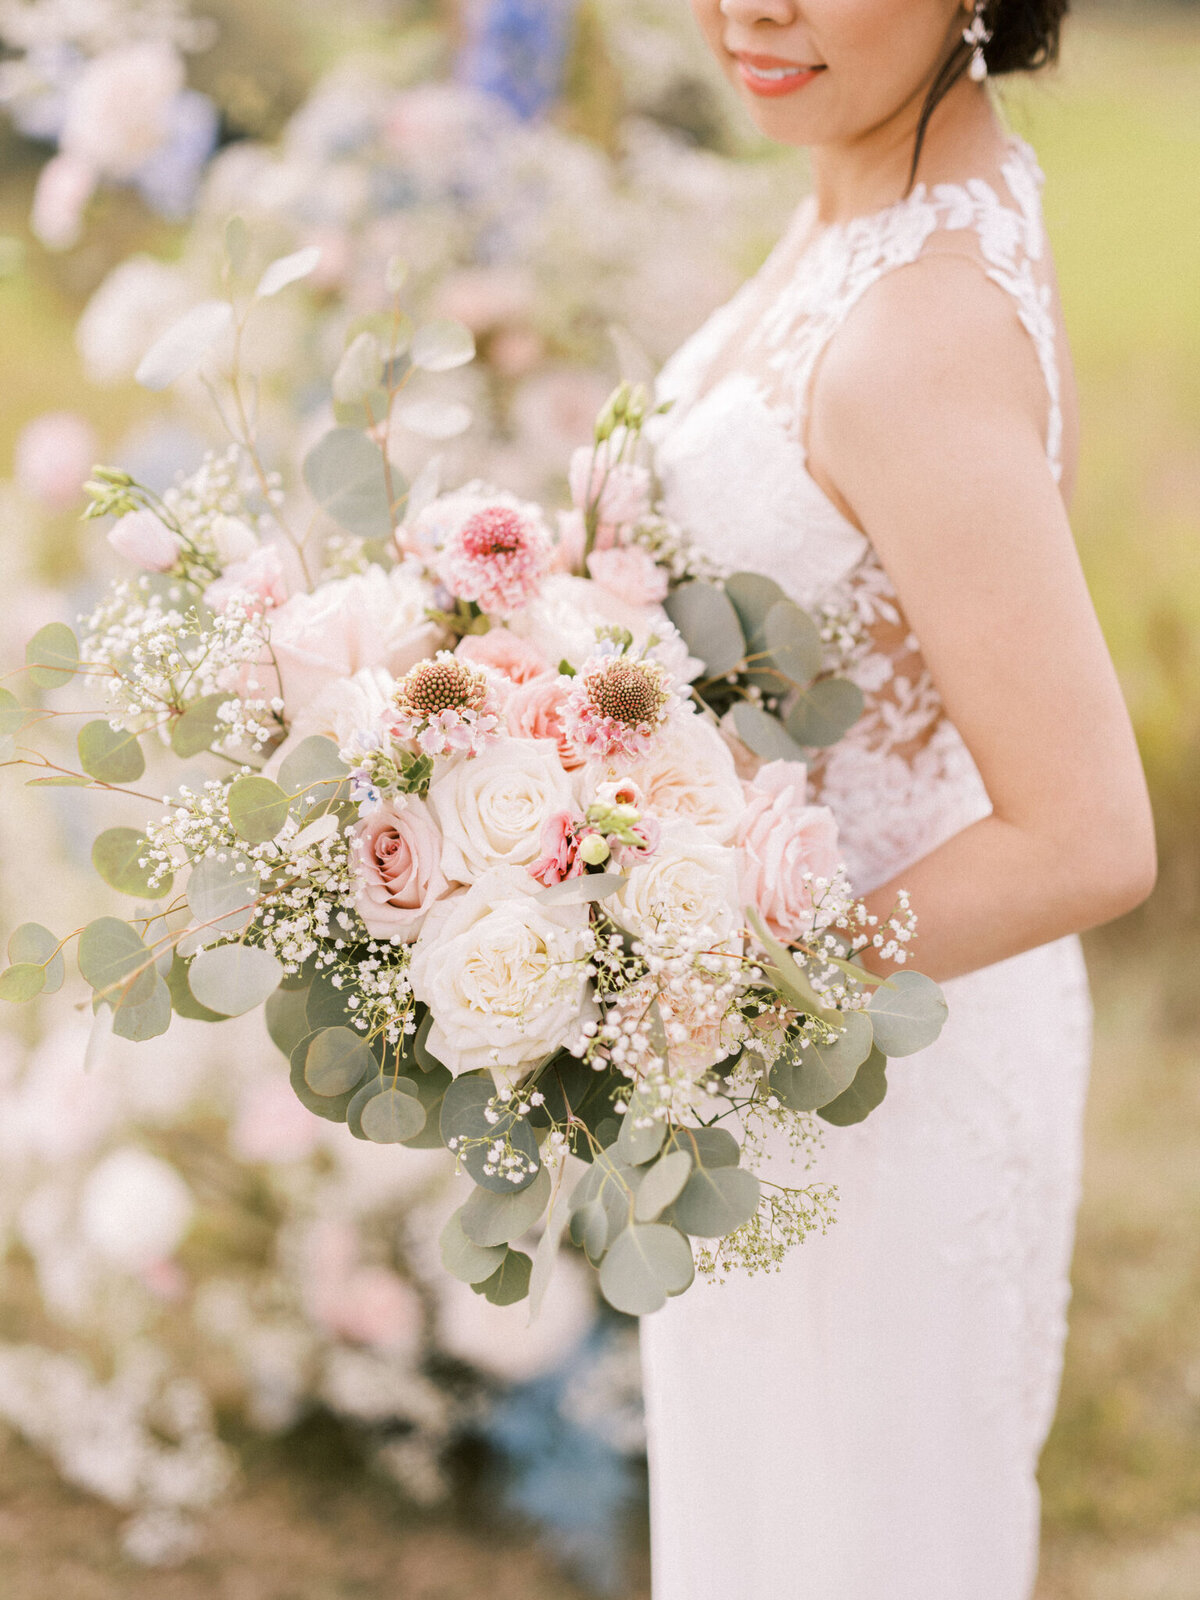 Classic bouquet with white and pink roses by Flower Aura By Natasha, classic Calgary, Alberta wedding florist, featured on the Brontë Bride Vendor Guide.